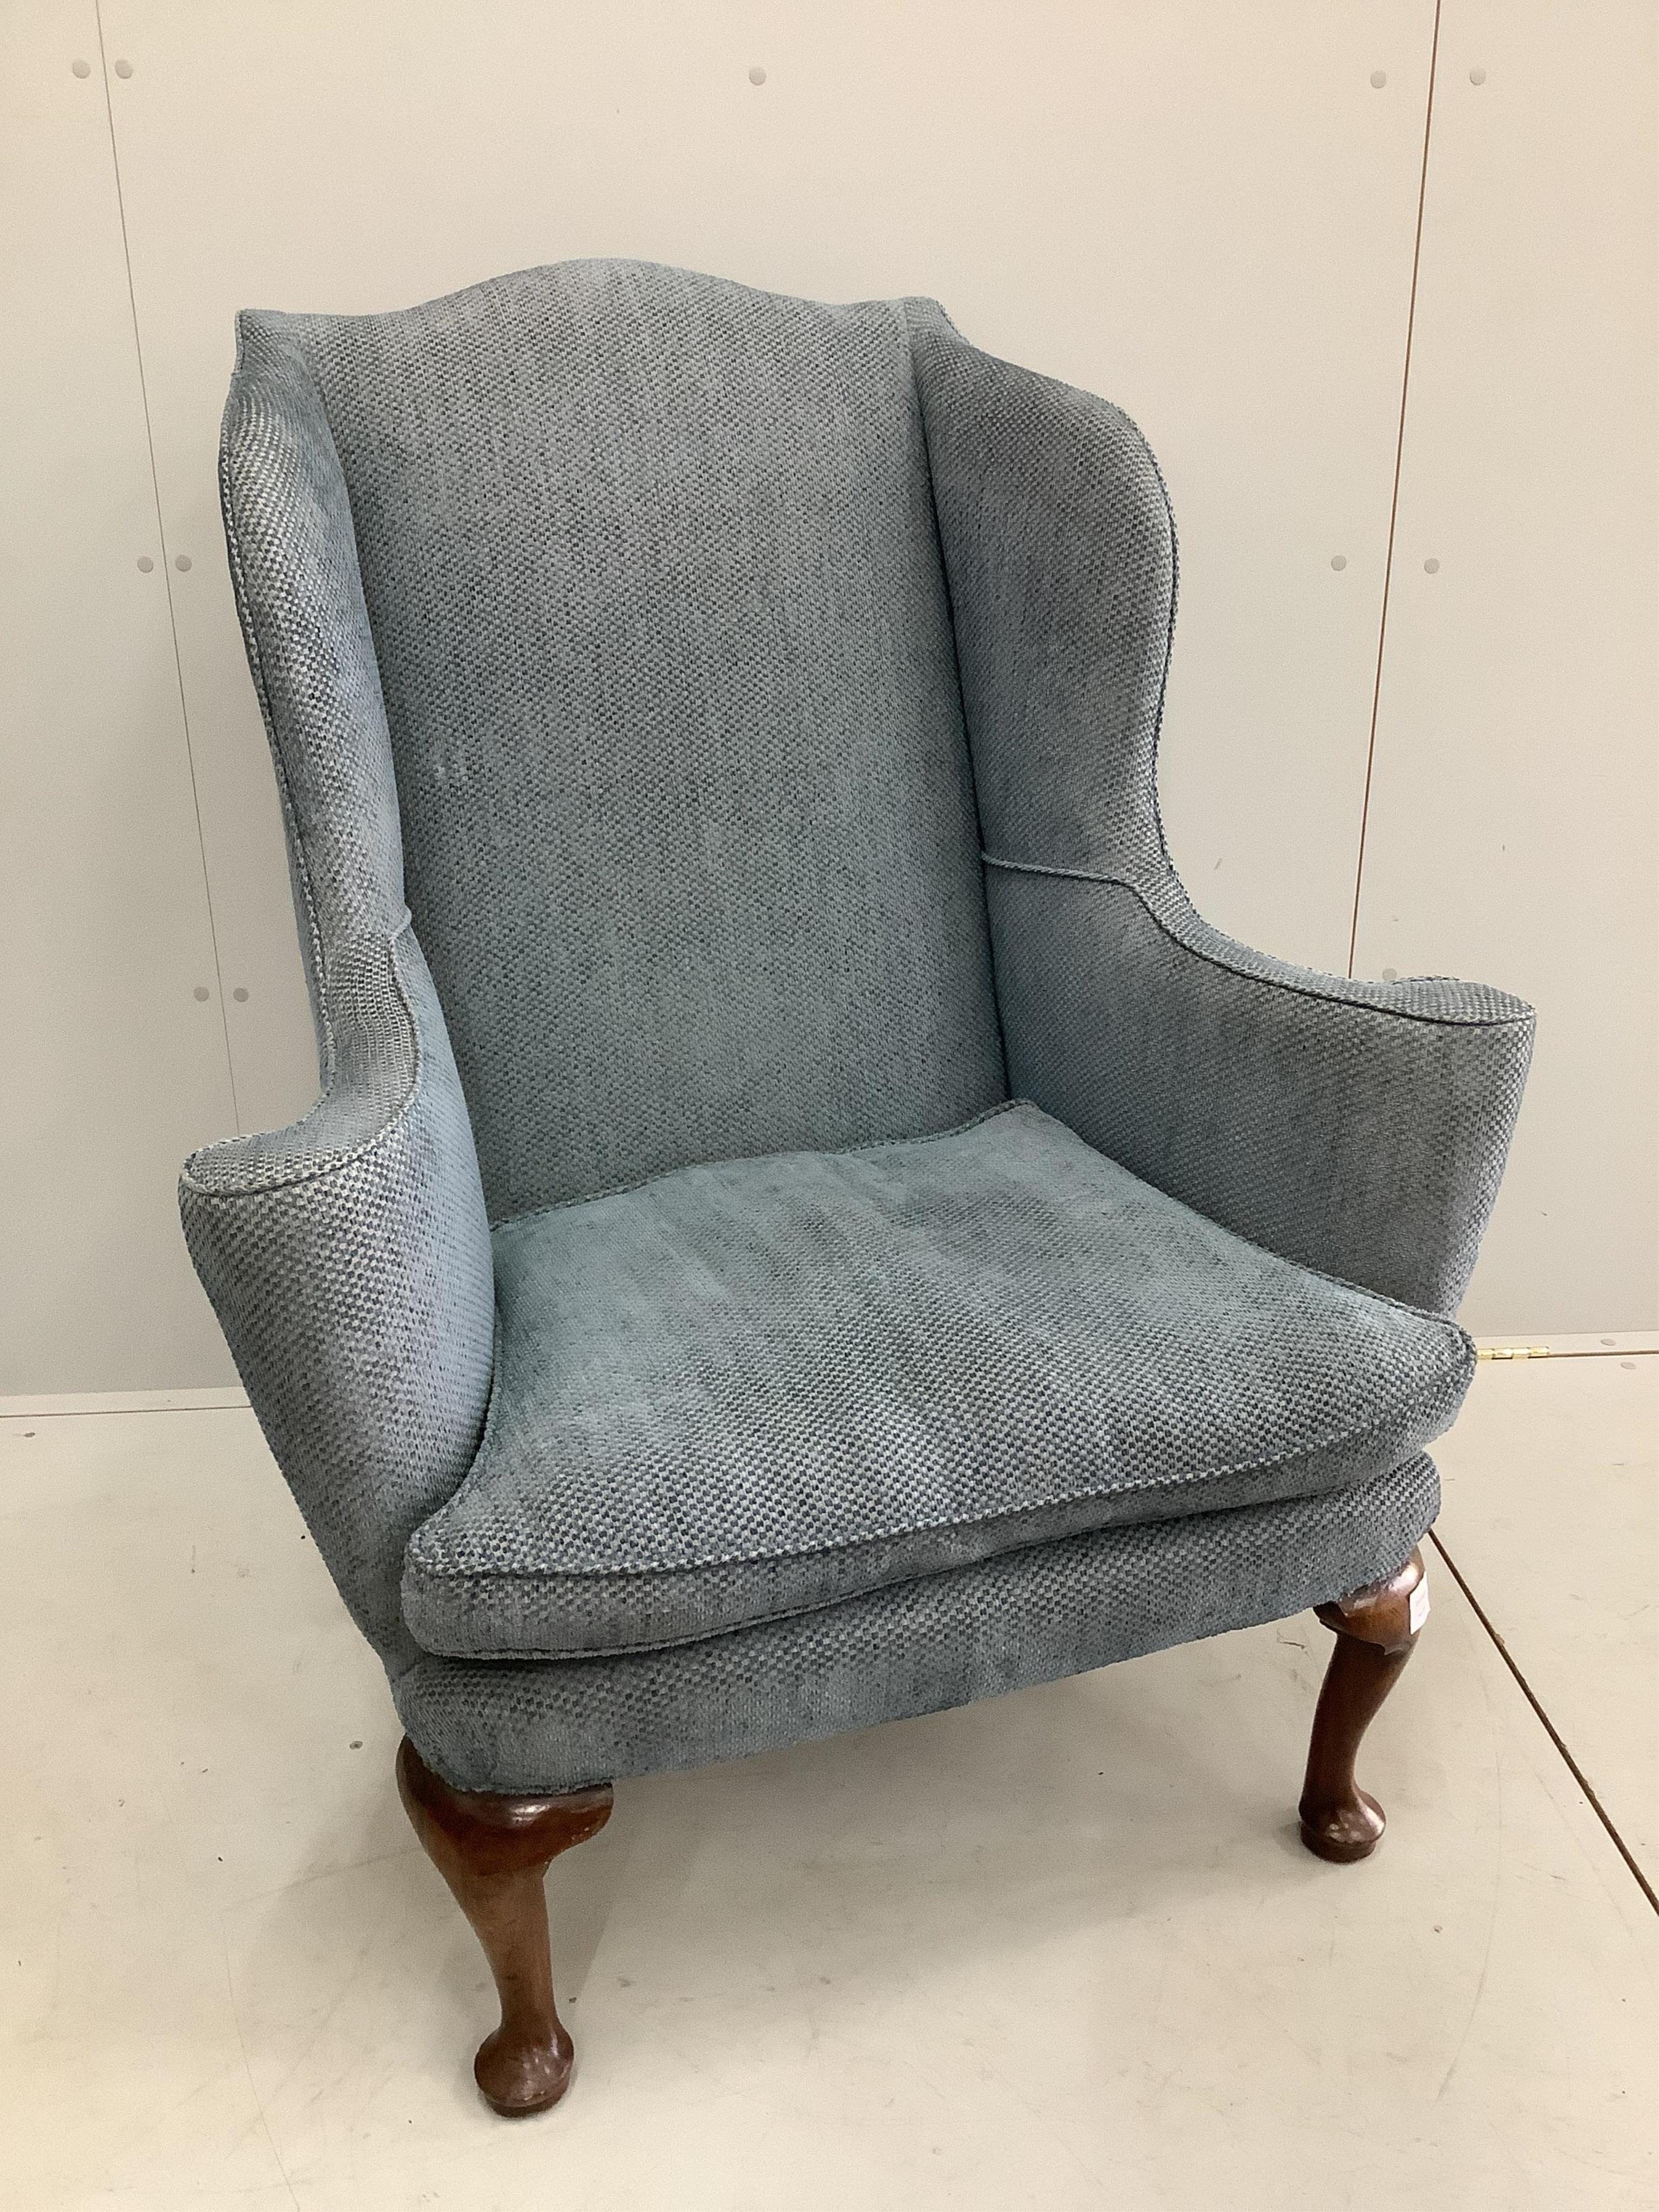 A George I walnut wing armchair, upholstered in blue fabric. Condition - good